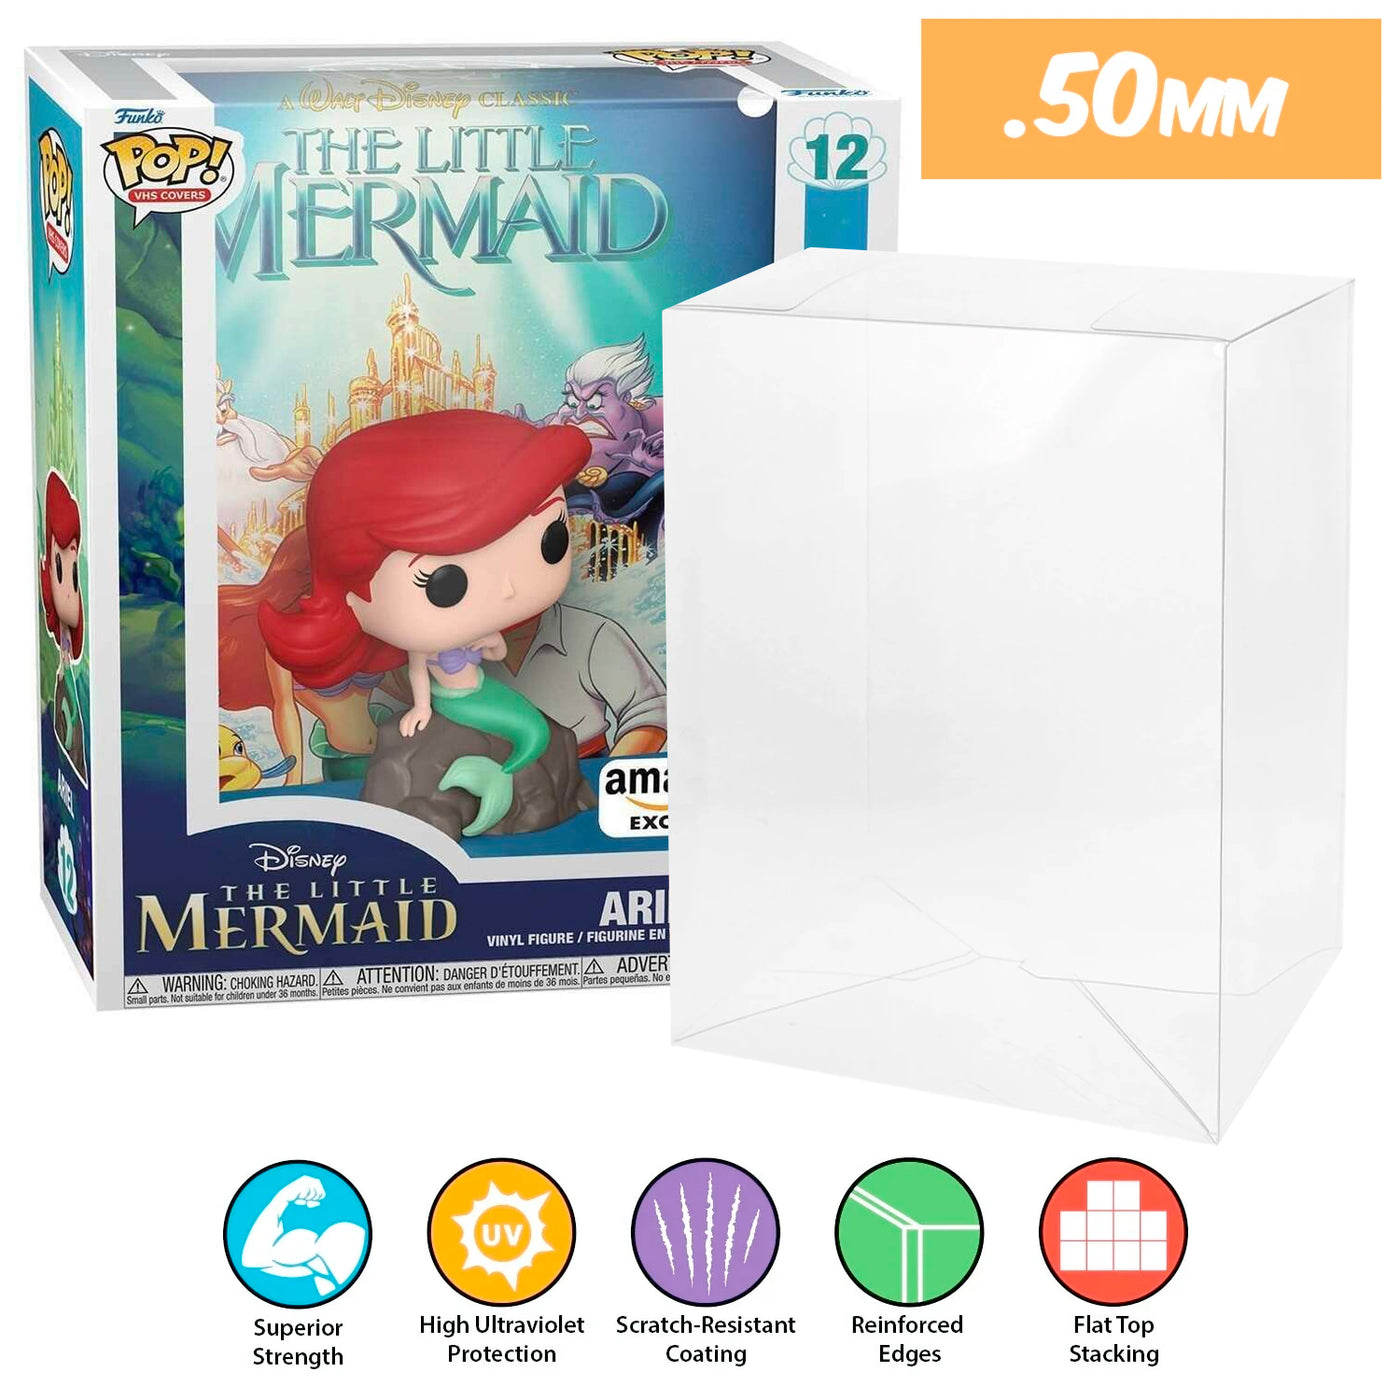 10 the little mermaid ariel amazon pop vhs covers best funko pop protectors thick strong uv scratch flat top stack vinyl display geek plastic shield vaulted eco armor fits collect protect display case kollector protector